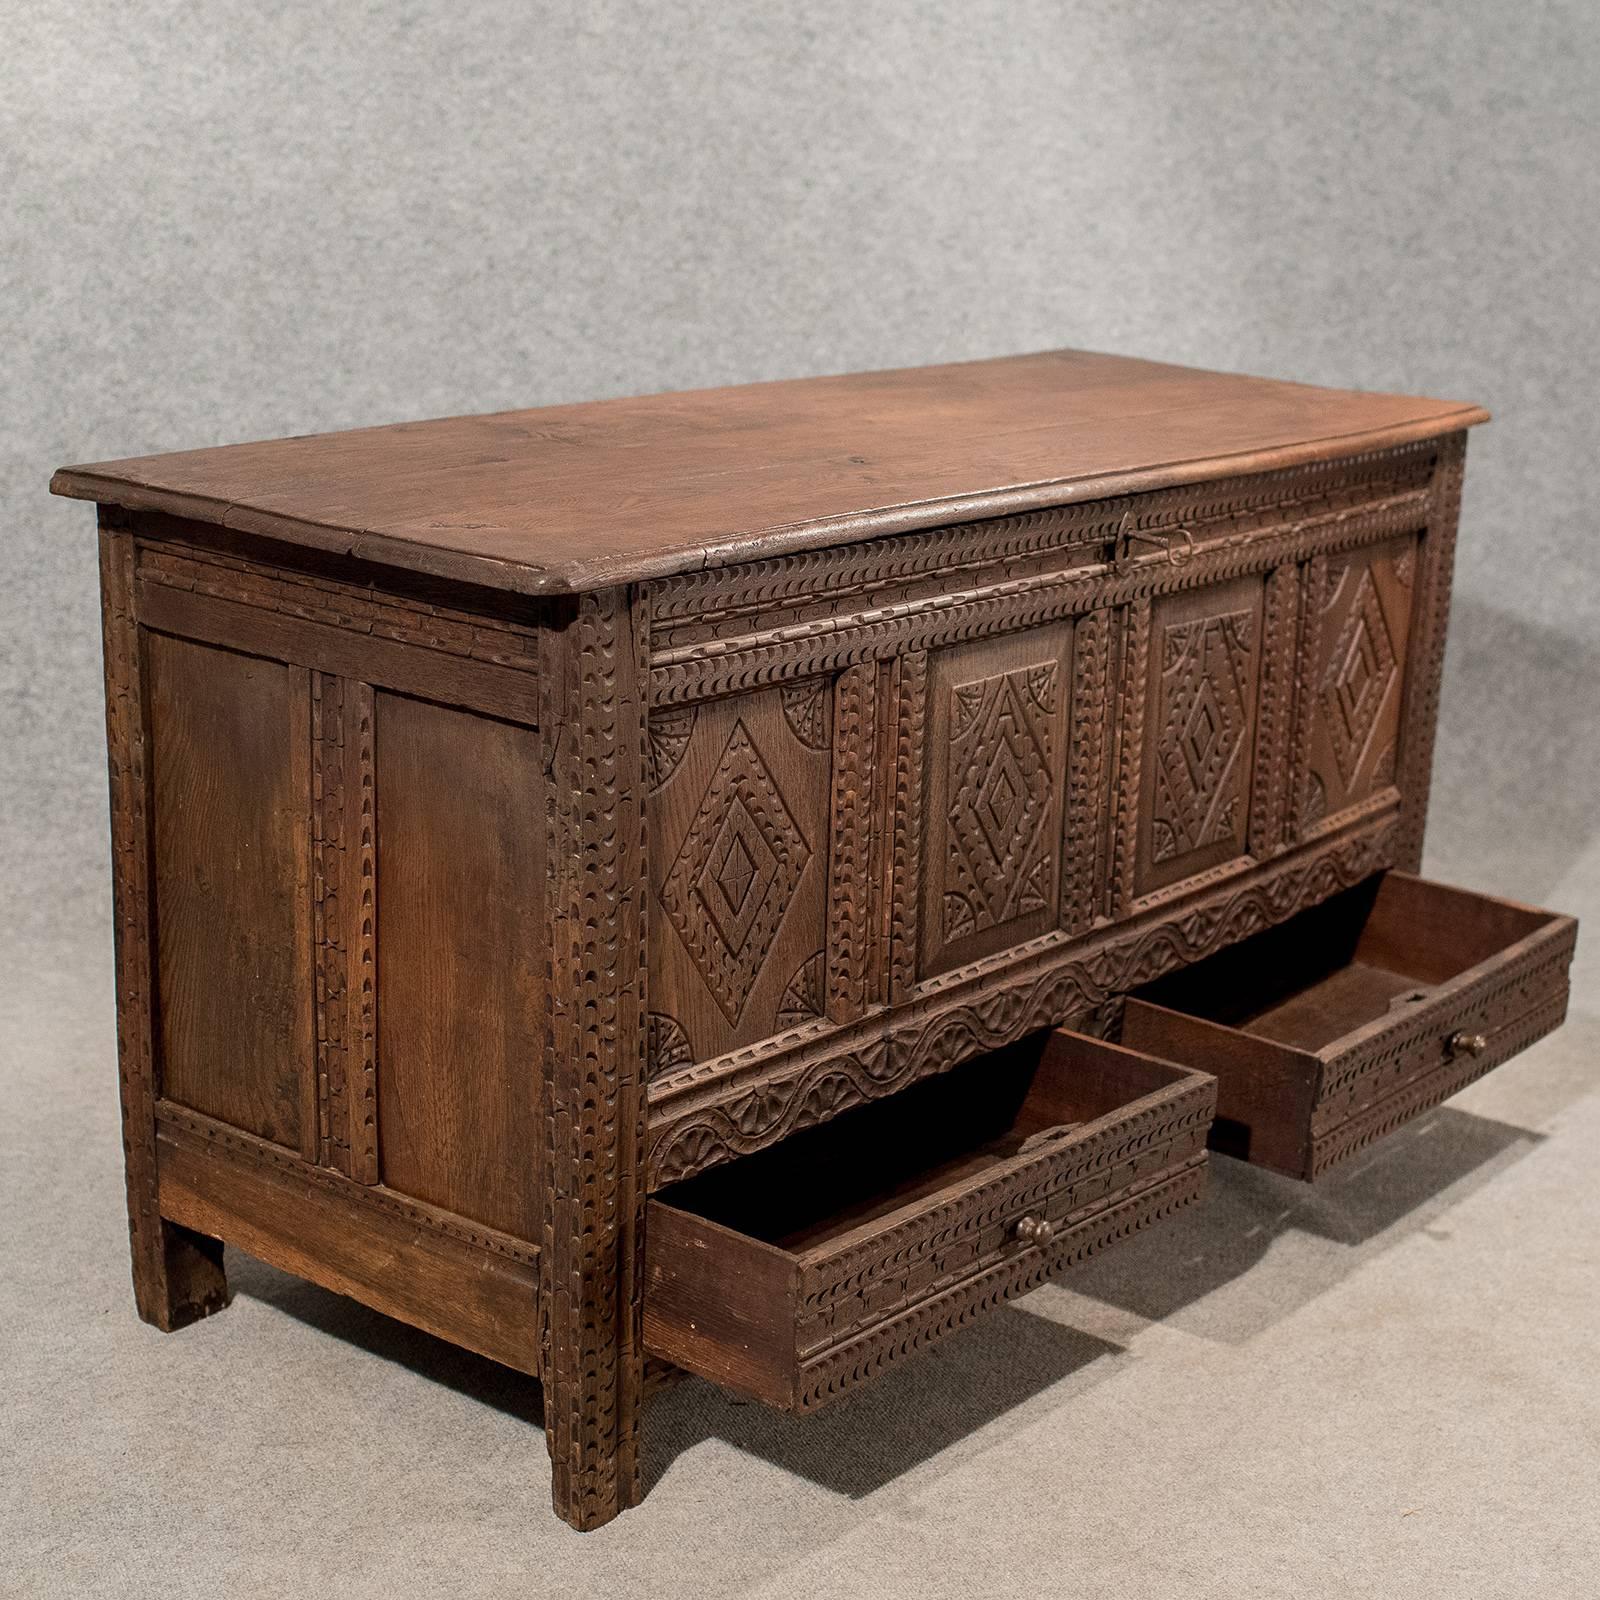 Early 18th Century Oak Coffer Mule Chest Carved Storage Trunk English Early Georgian, circa 1720